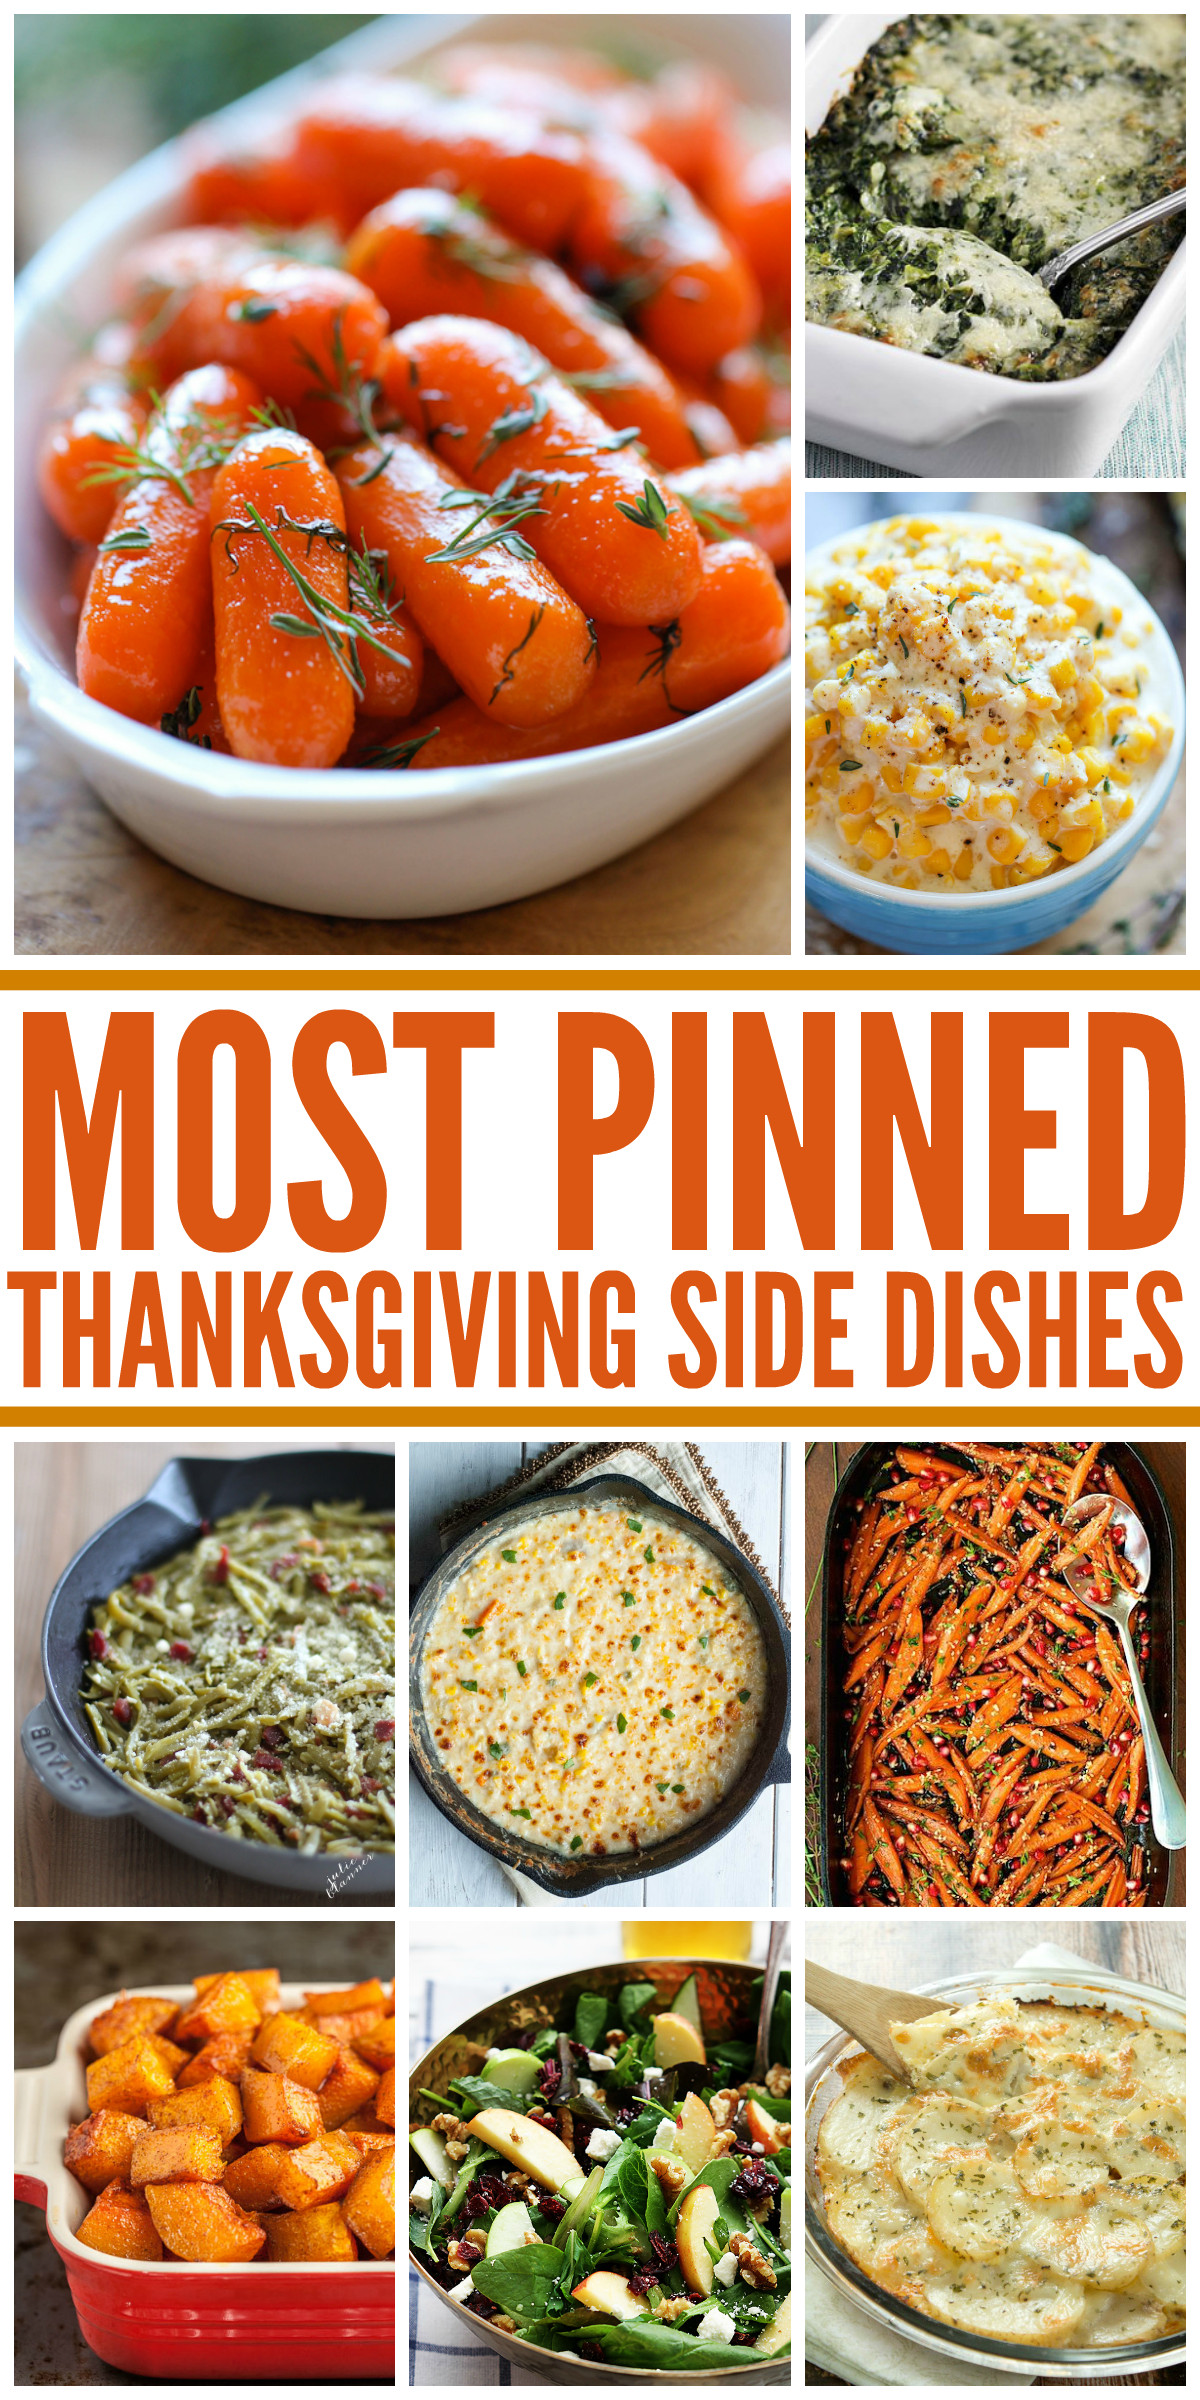 Holiday Side Dishes
 25 Most Pinned Holiday Side Dishes